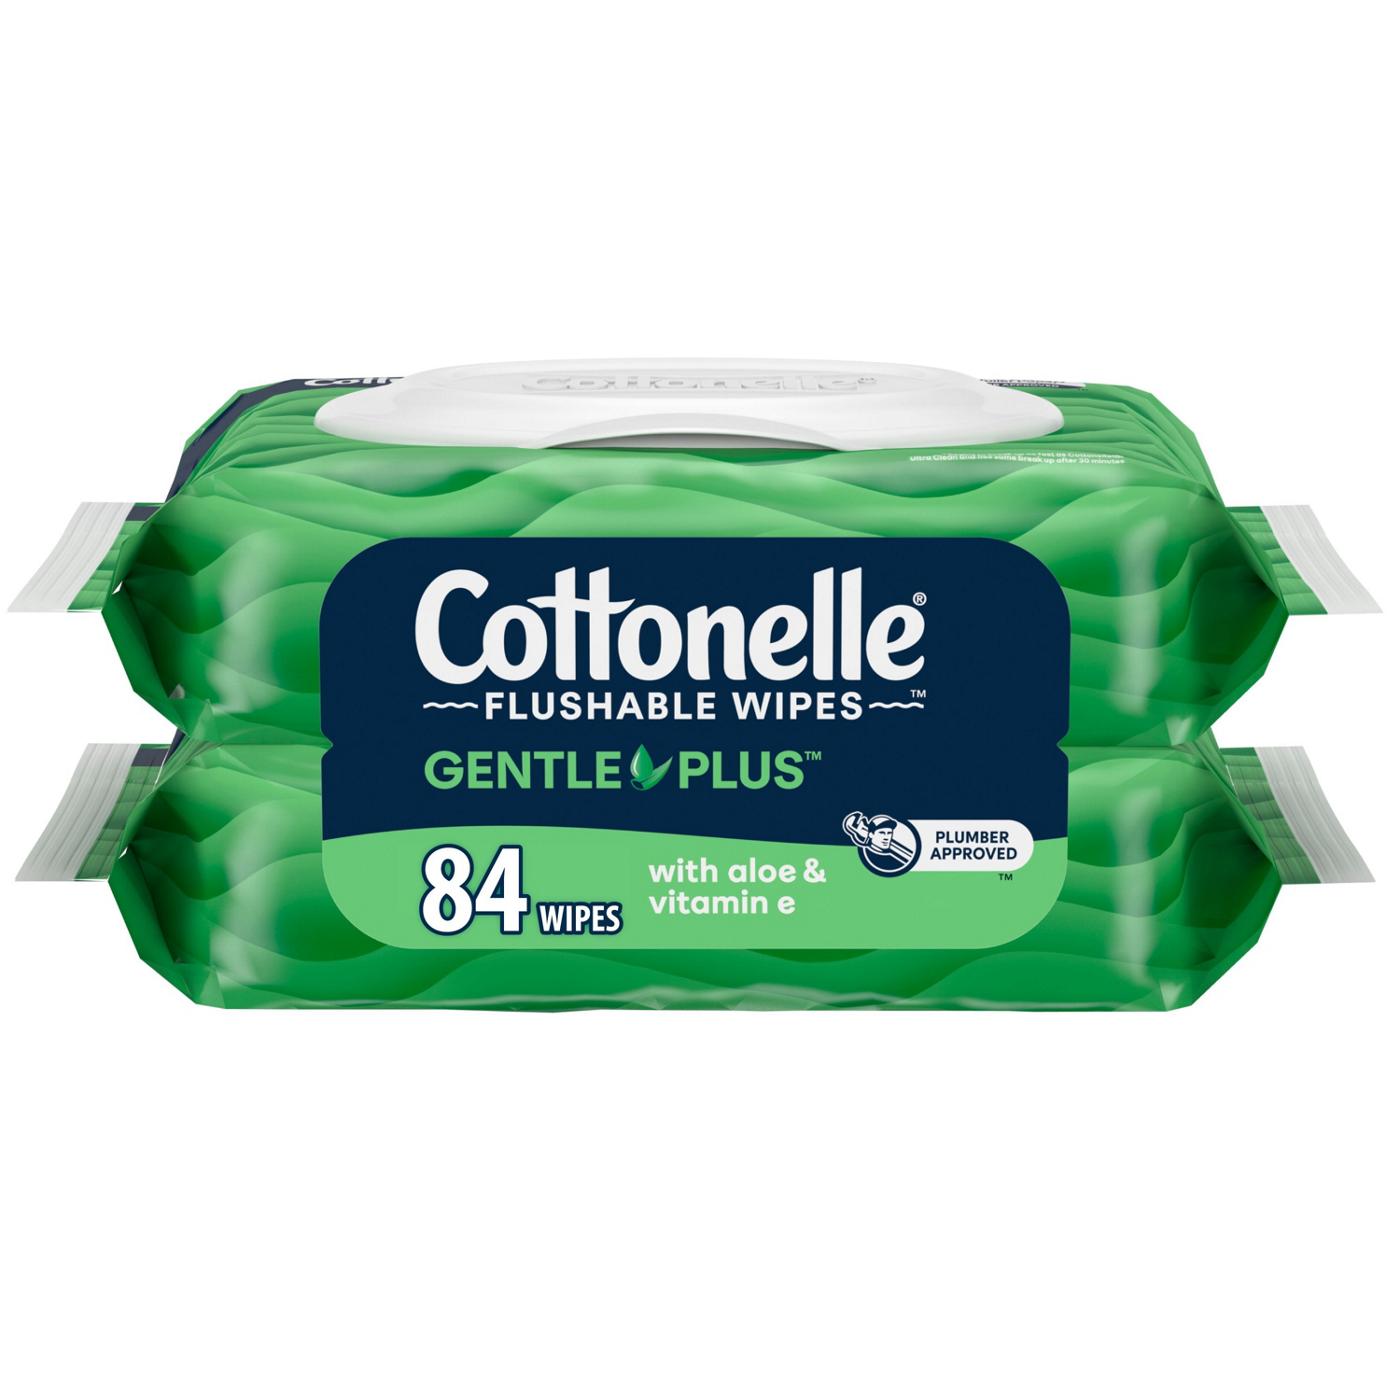 Cottonelle GentlePlus Flushable Wet Wipes with Aloe & Vitamin E; image 1 of 8